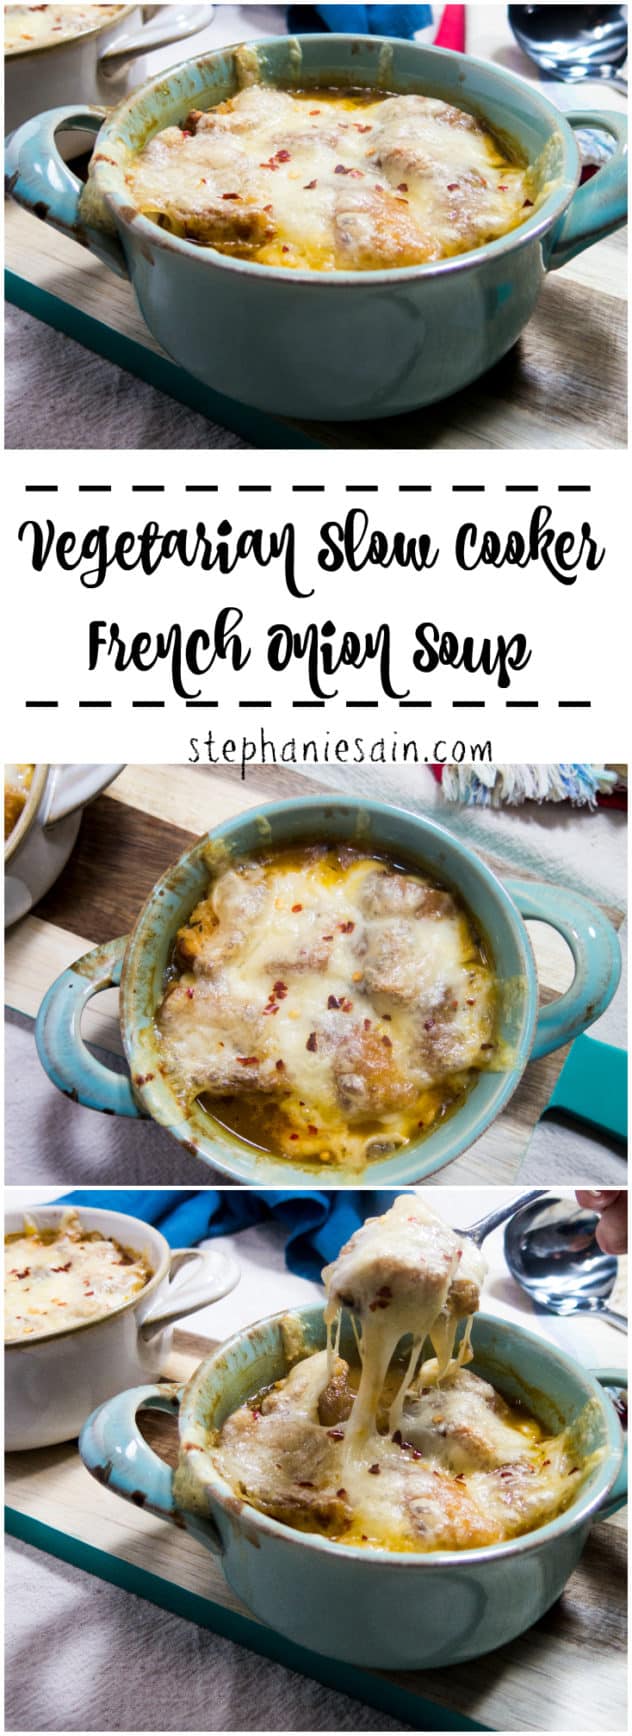 Vegetarian Slow Cooker French Onion Soup is a hearty, tasty soup that is perfect for all your Fall evenings. Great on its own or served with salad. Vegetarian and Gluten Free.